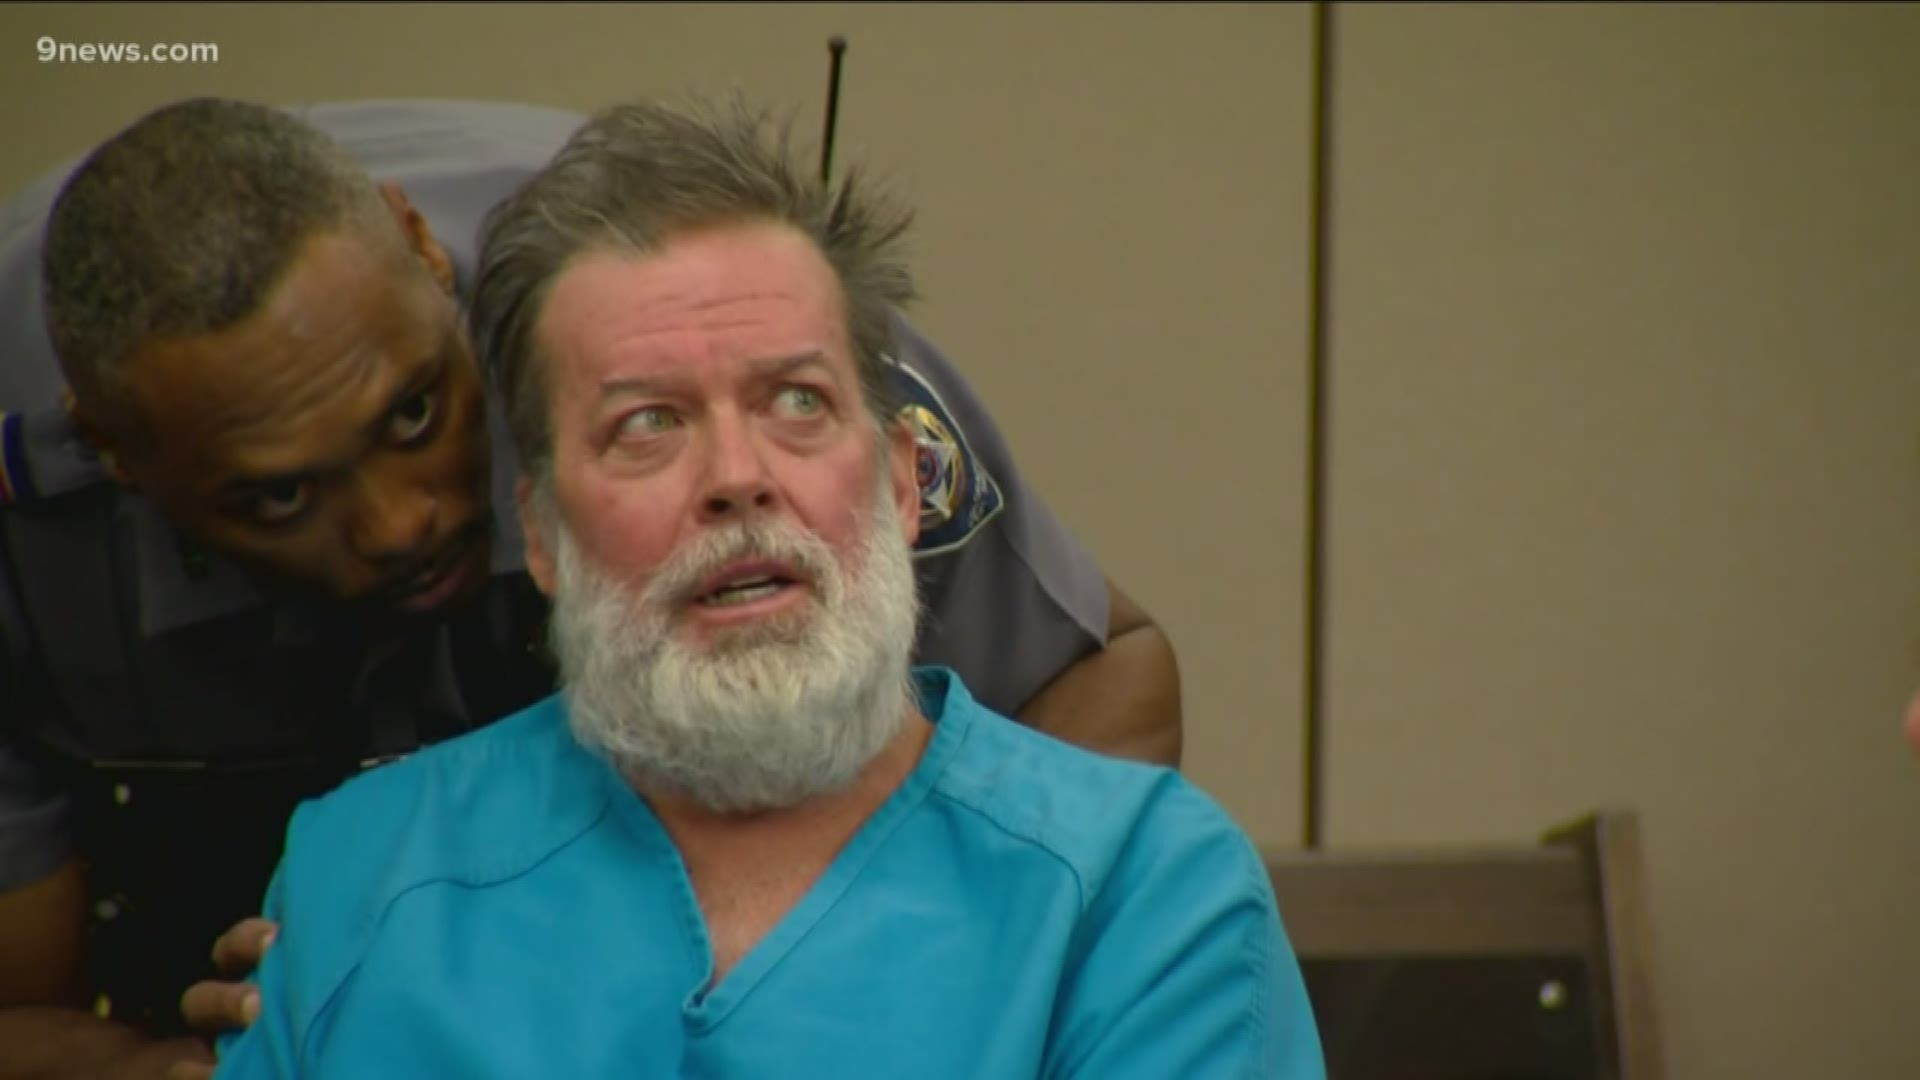 Robert Dear Jr. has not gone to trial for the 2015 shooting because he's repeatedly been ruled incompetent.